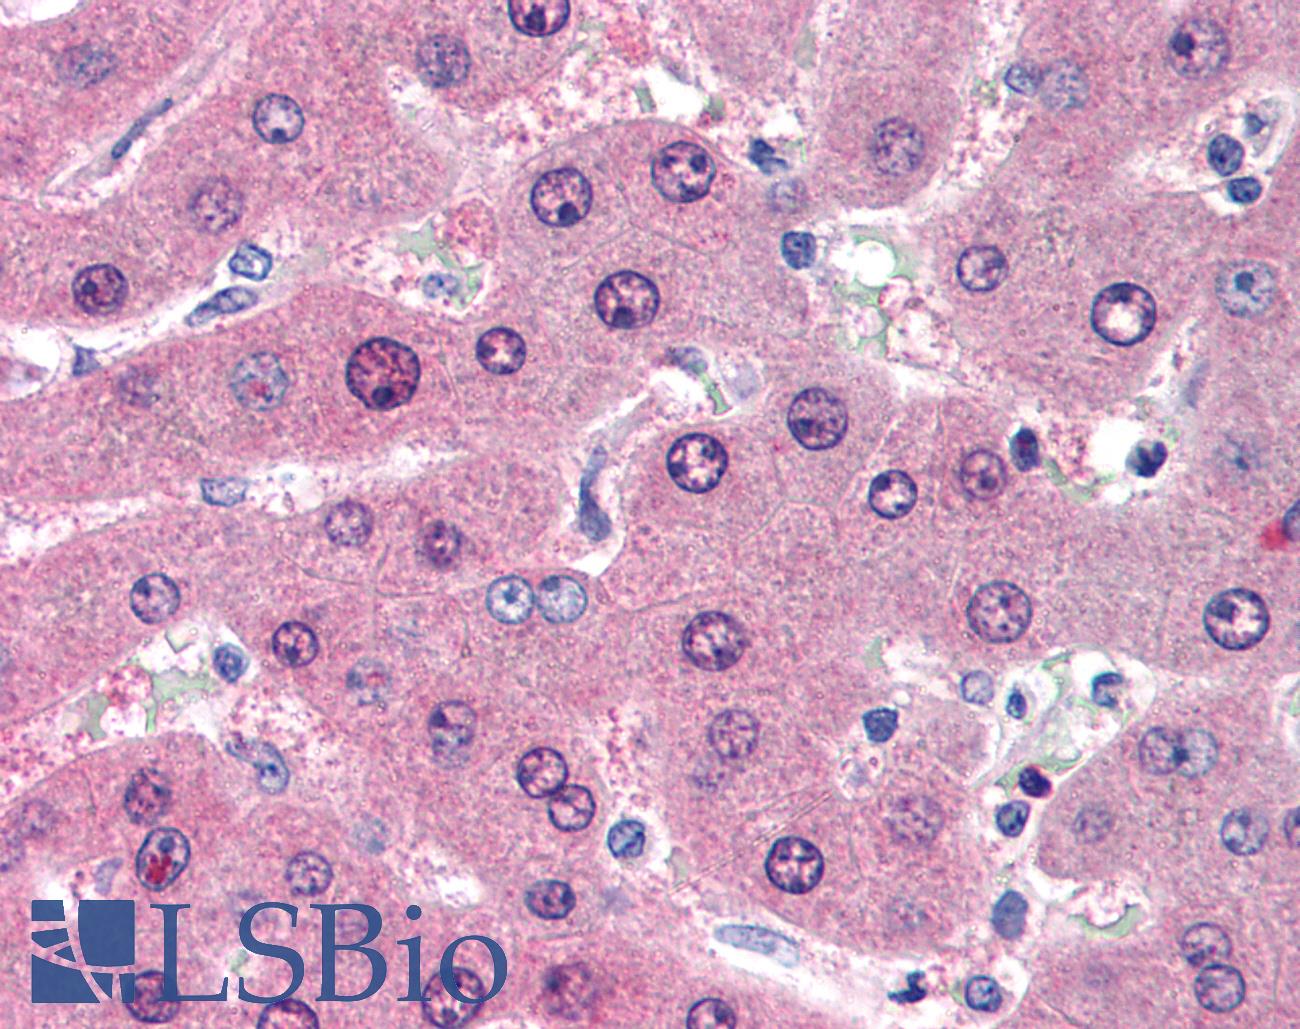 LIME1 / LIME Antibody - Anti-LIME1 / LIME antibody IHC of human liver. Immunohistochemistry of formalin-fixed, paraffin-embedded tissue after heat-induced antigen retrieval. Antibody concentration 10 ug/ml.